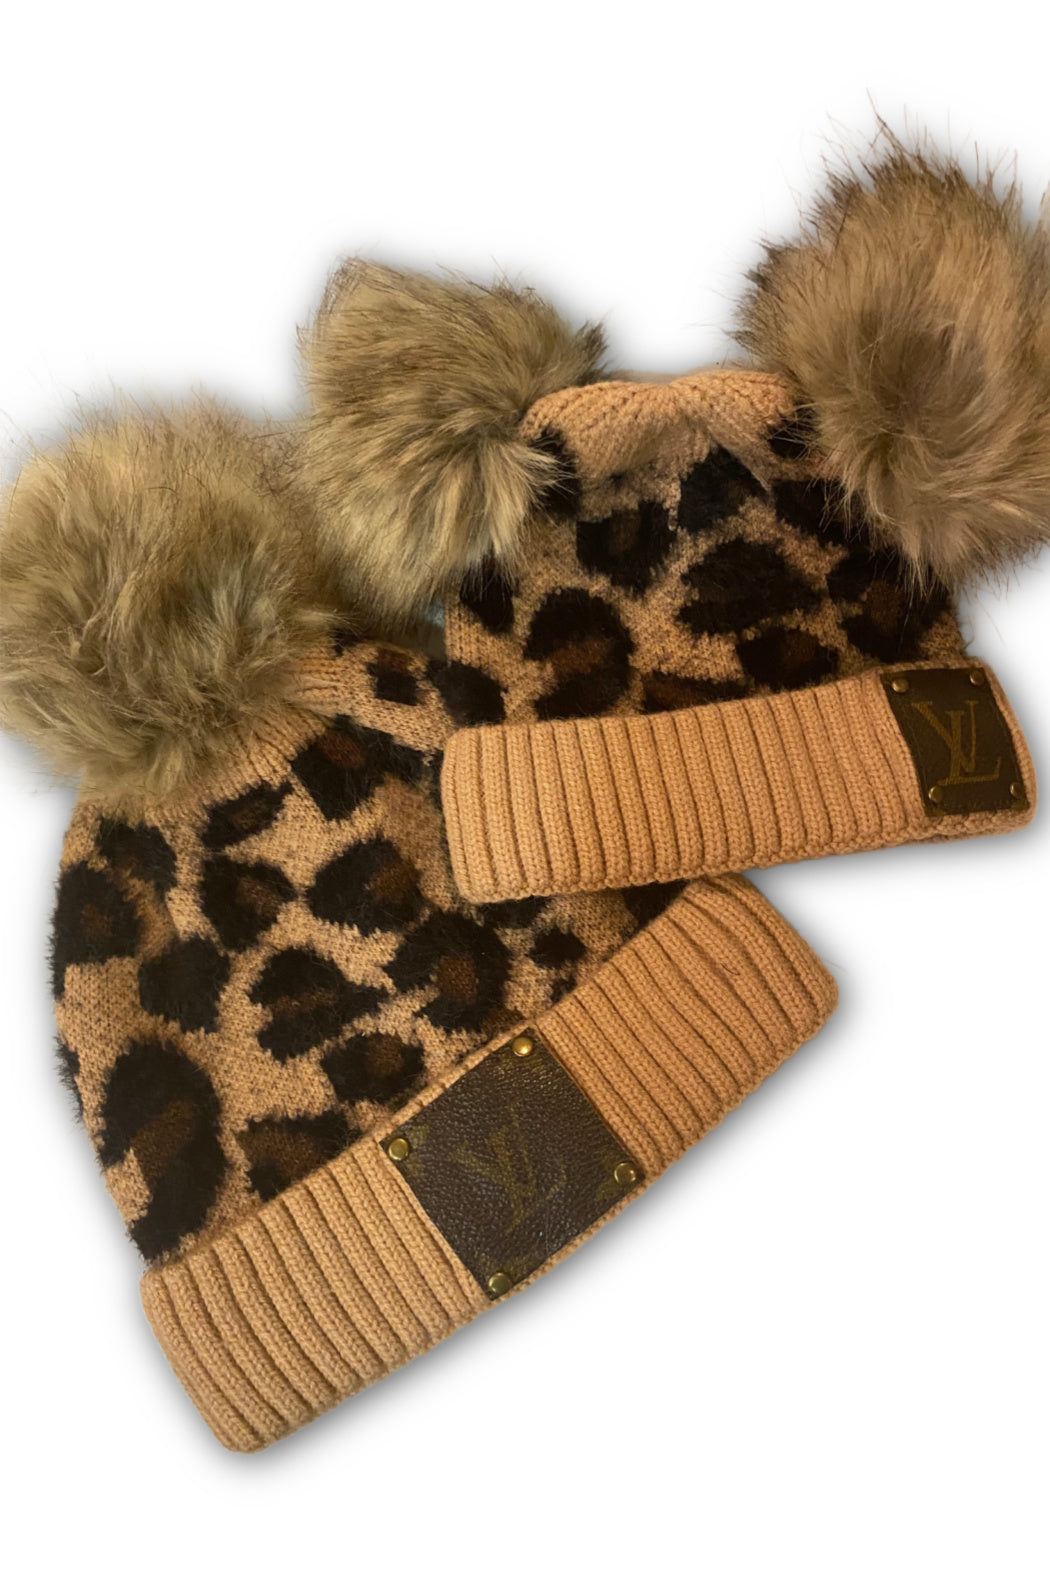 Set of 2 Upcycled Leopard Beanies